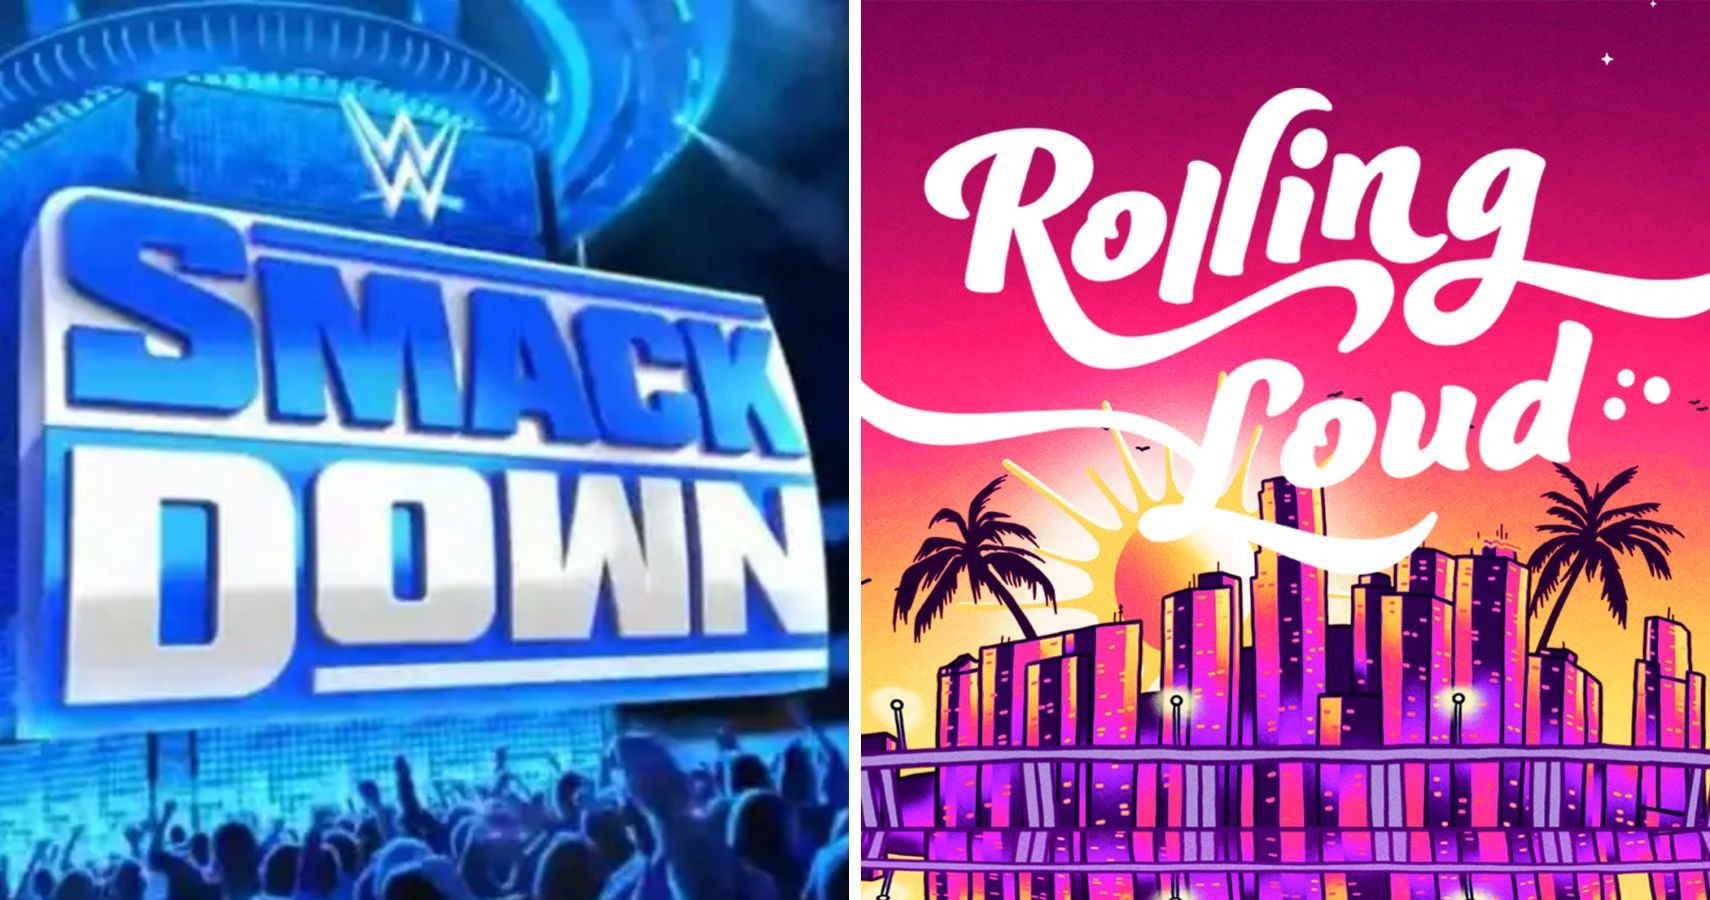 LEFT: The logo for WWE SmackDown on FOX // RIGHT: The flyer for Rolling Loud's music festival in Miami